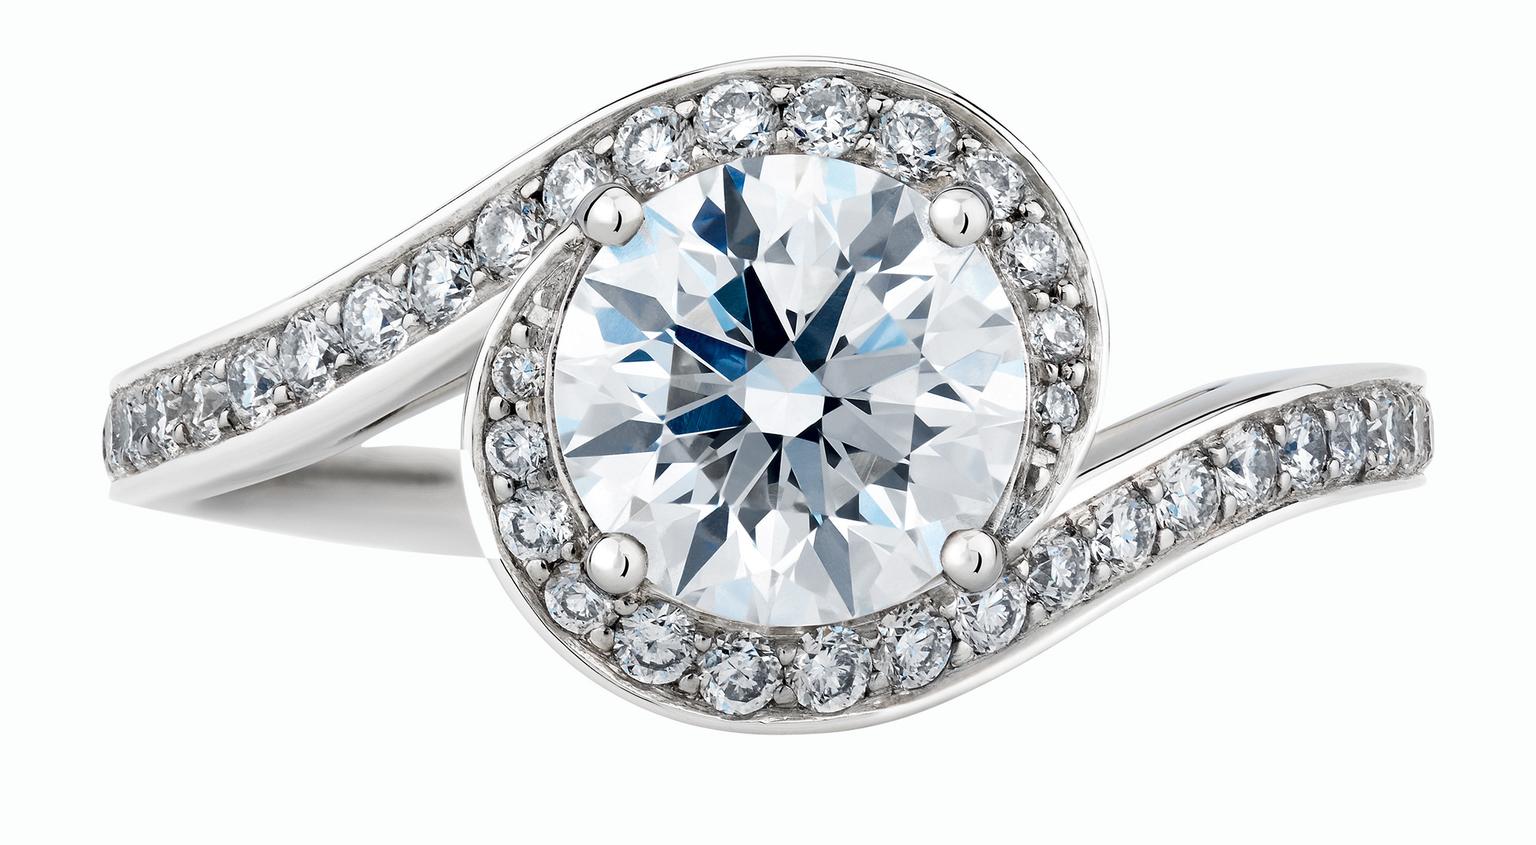 New addition to the collection of De Beers engagement rings is a modern ode  to love | The Jewellery Editor